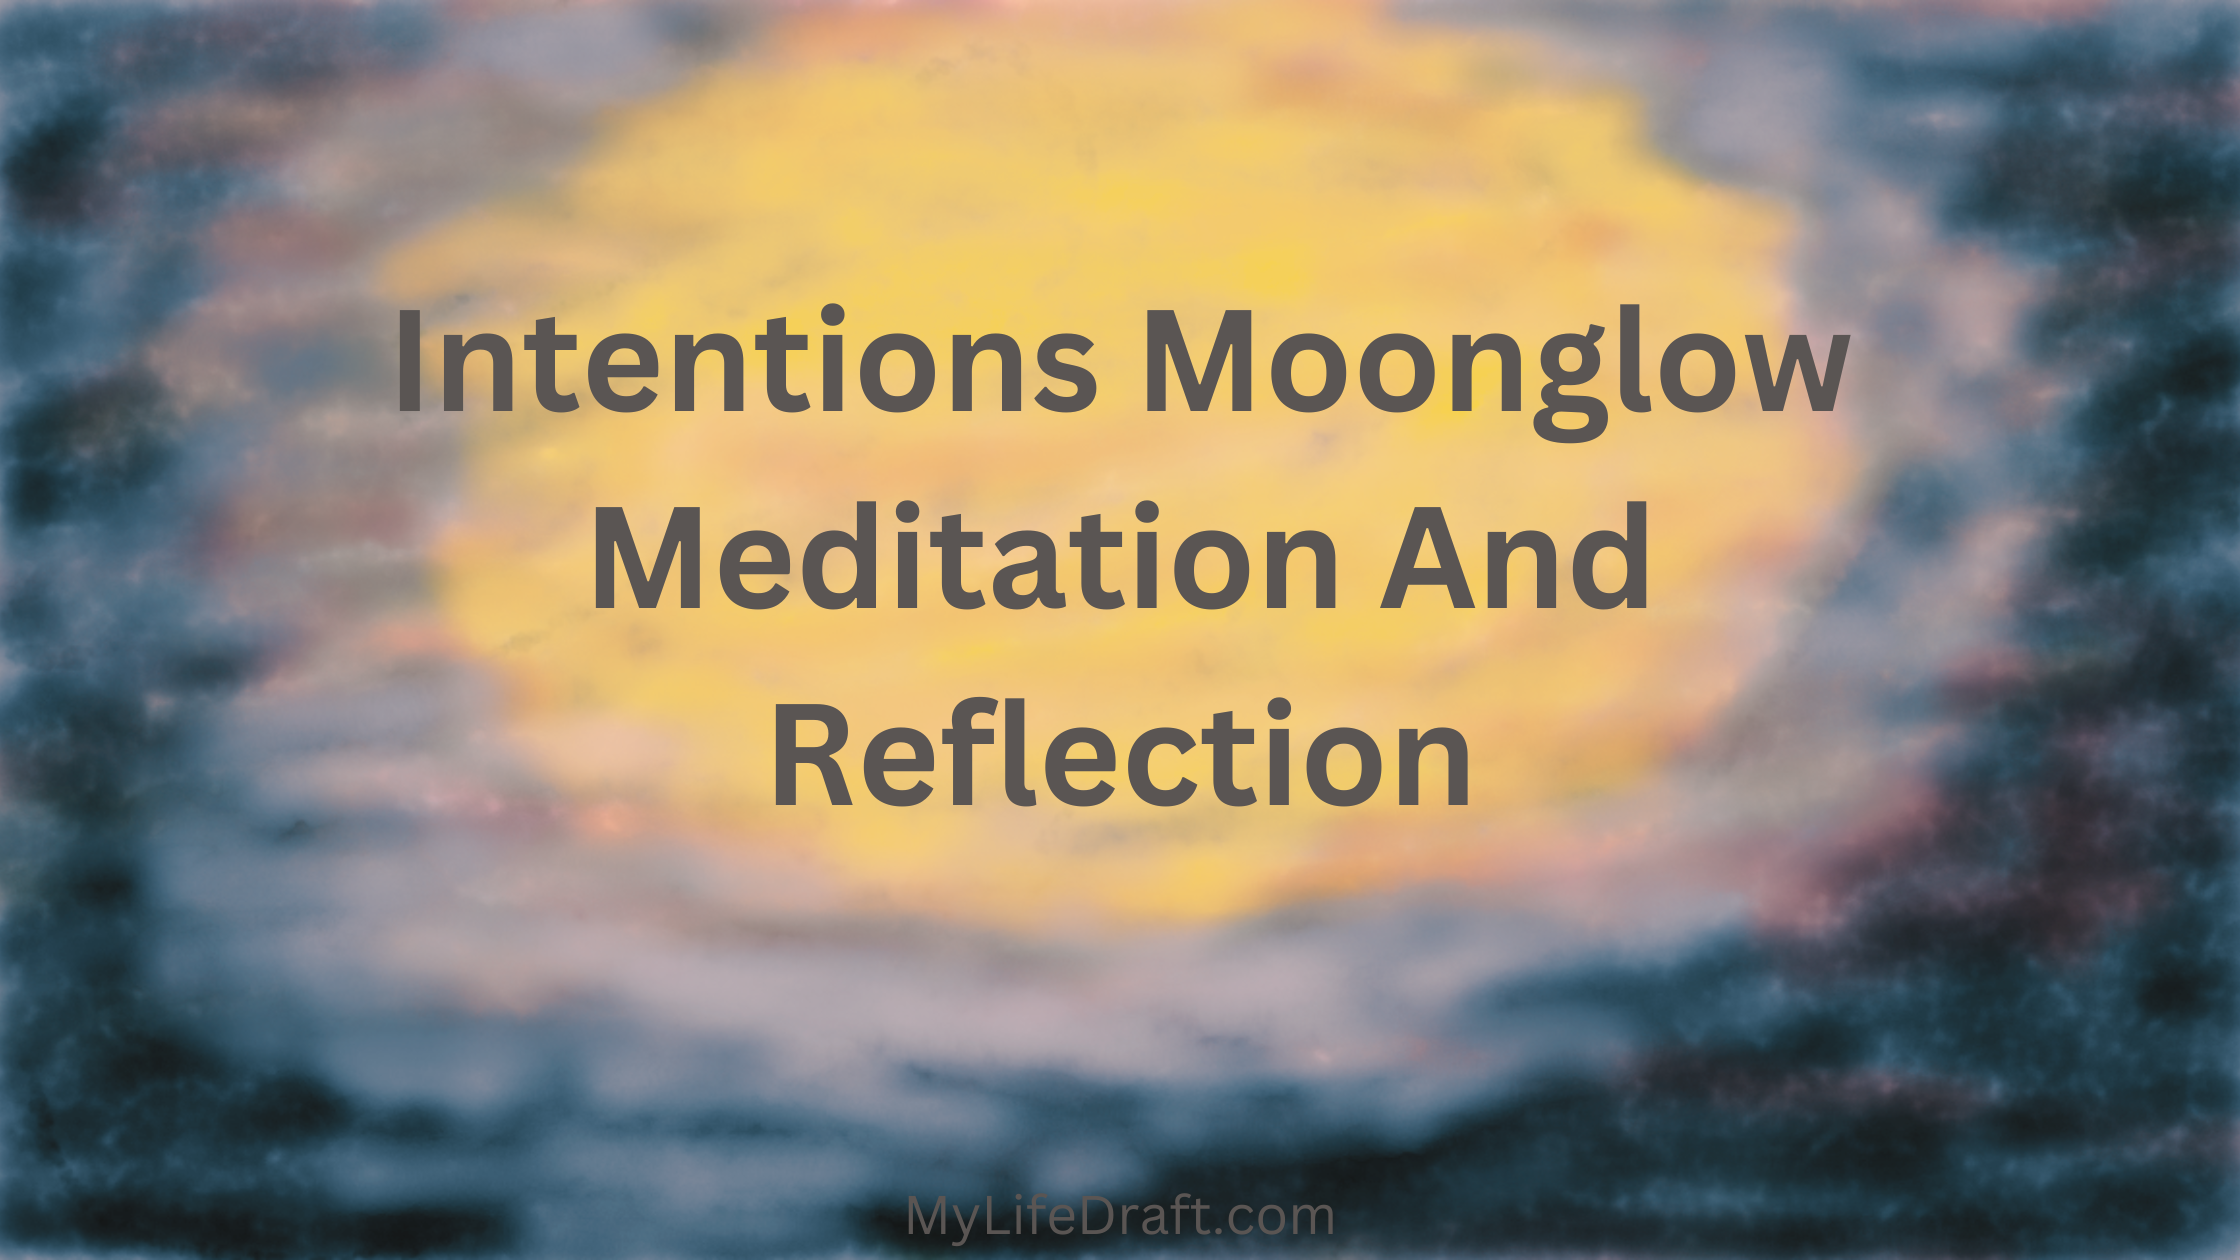 Intentions Moonglow: Meditation And Reflection